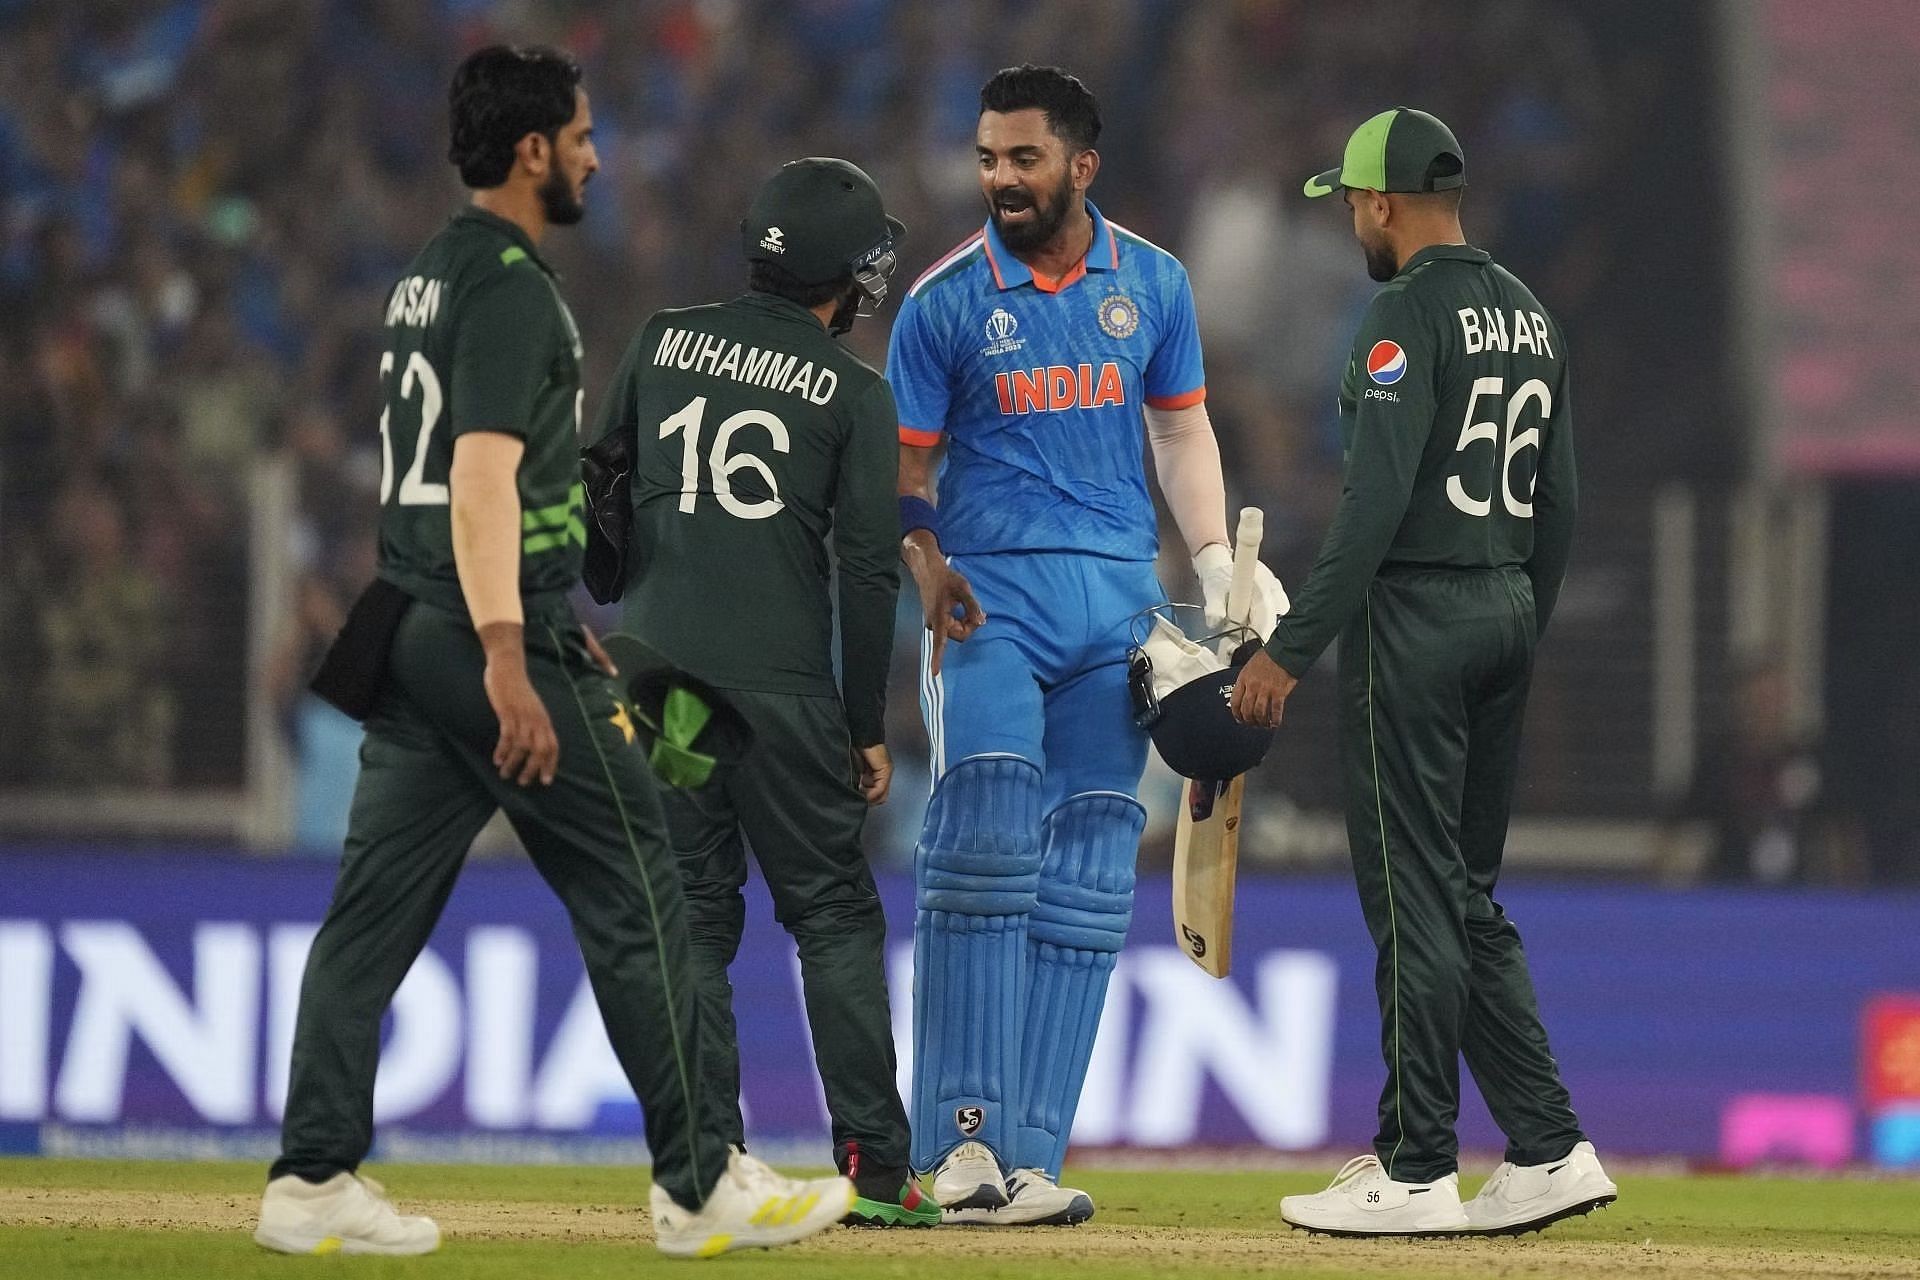 India registered a convincing win in their league-stage clash against Pakistan. [P/C: AP]